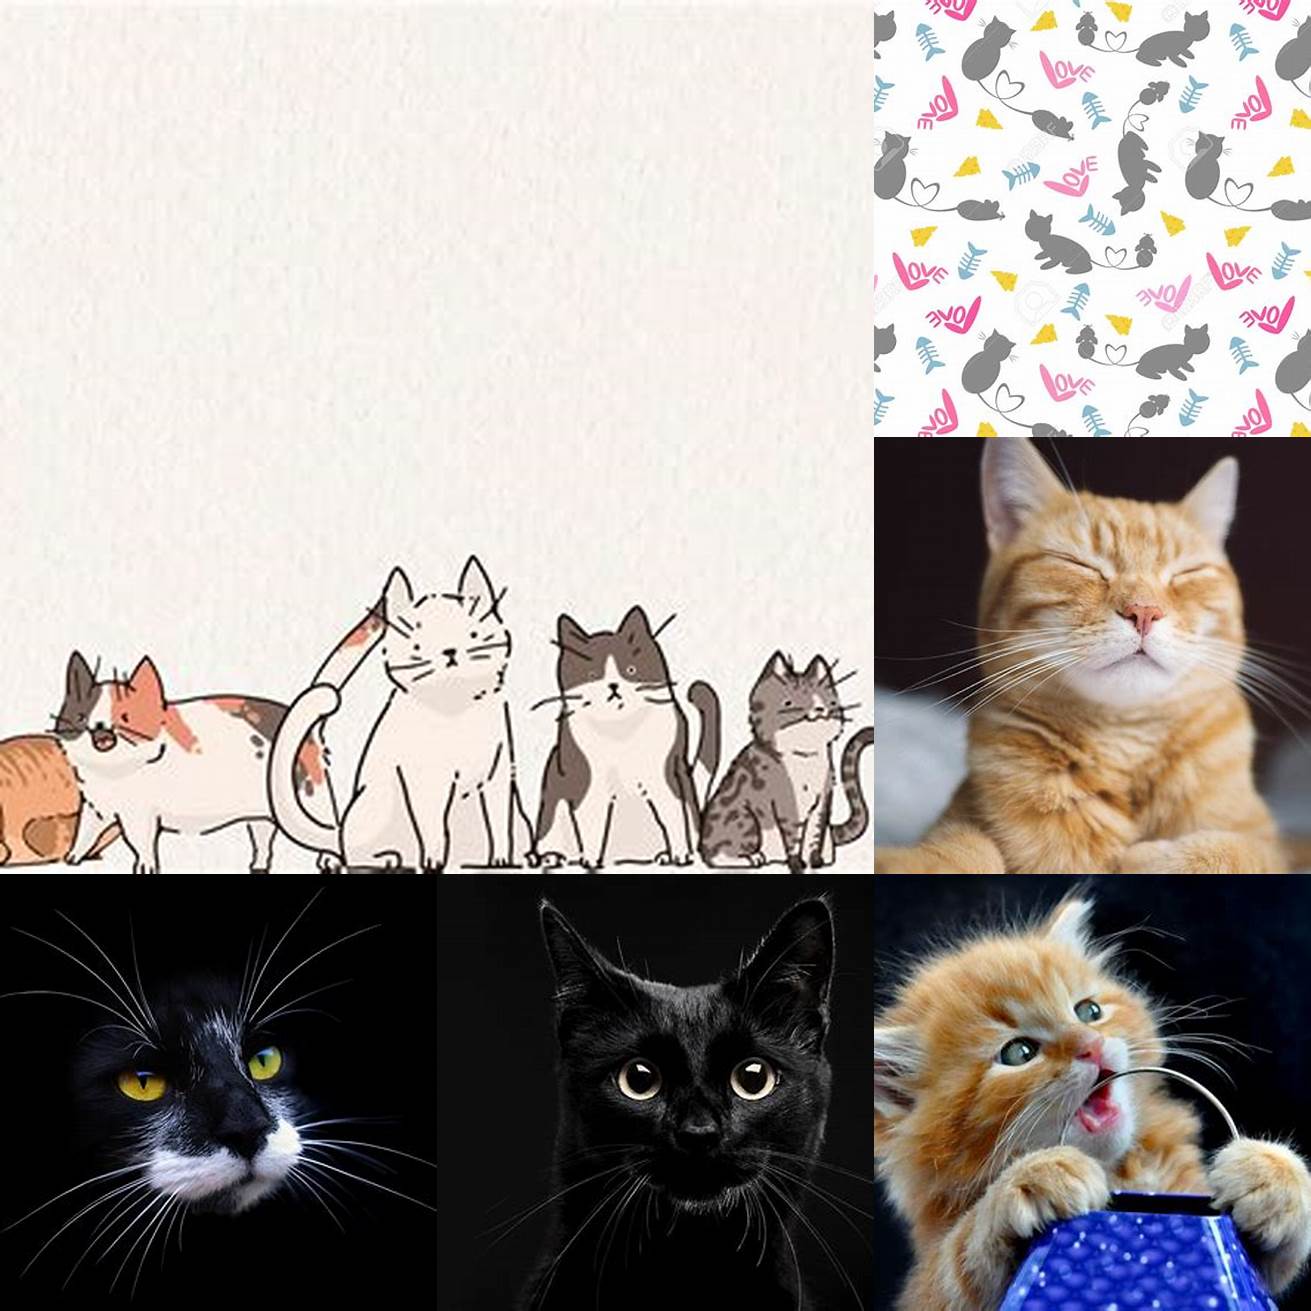 Cat-themed backgrounds